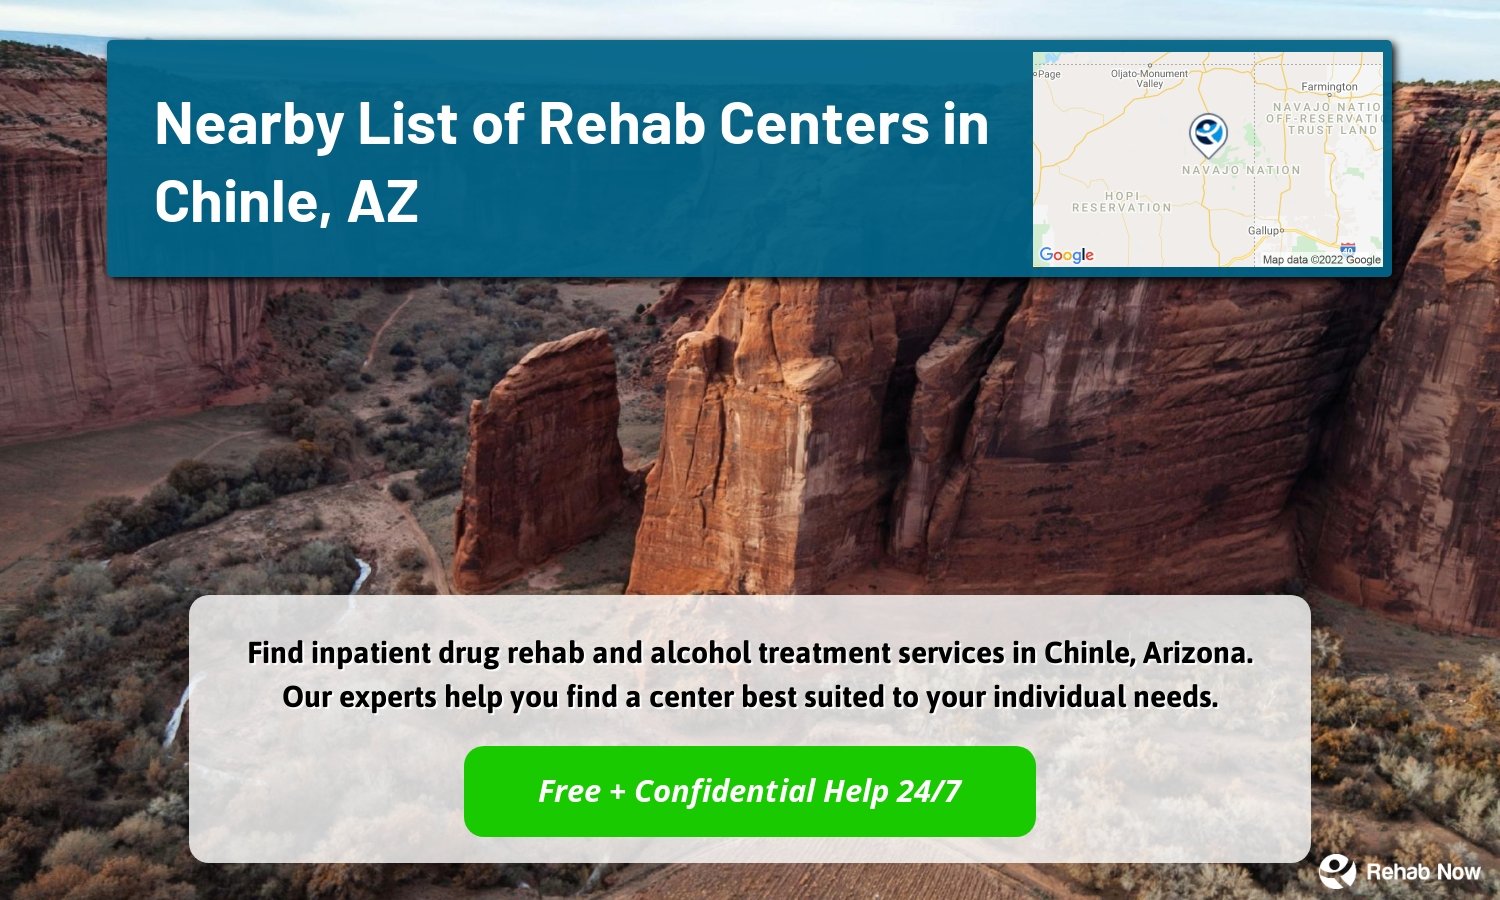 Find inpatient drug rehab and alcohol treatment services in Chinle, Arizona. Our experts help you find a center best suited to your individual needs.